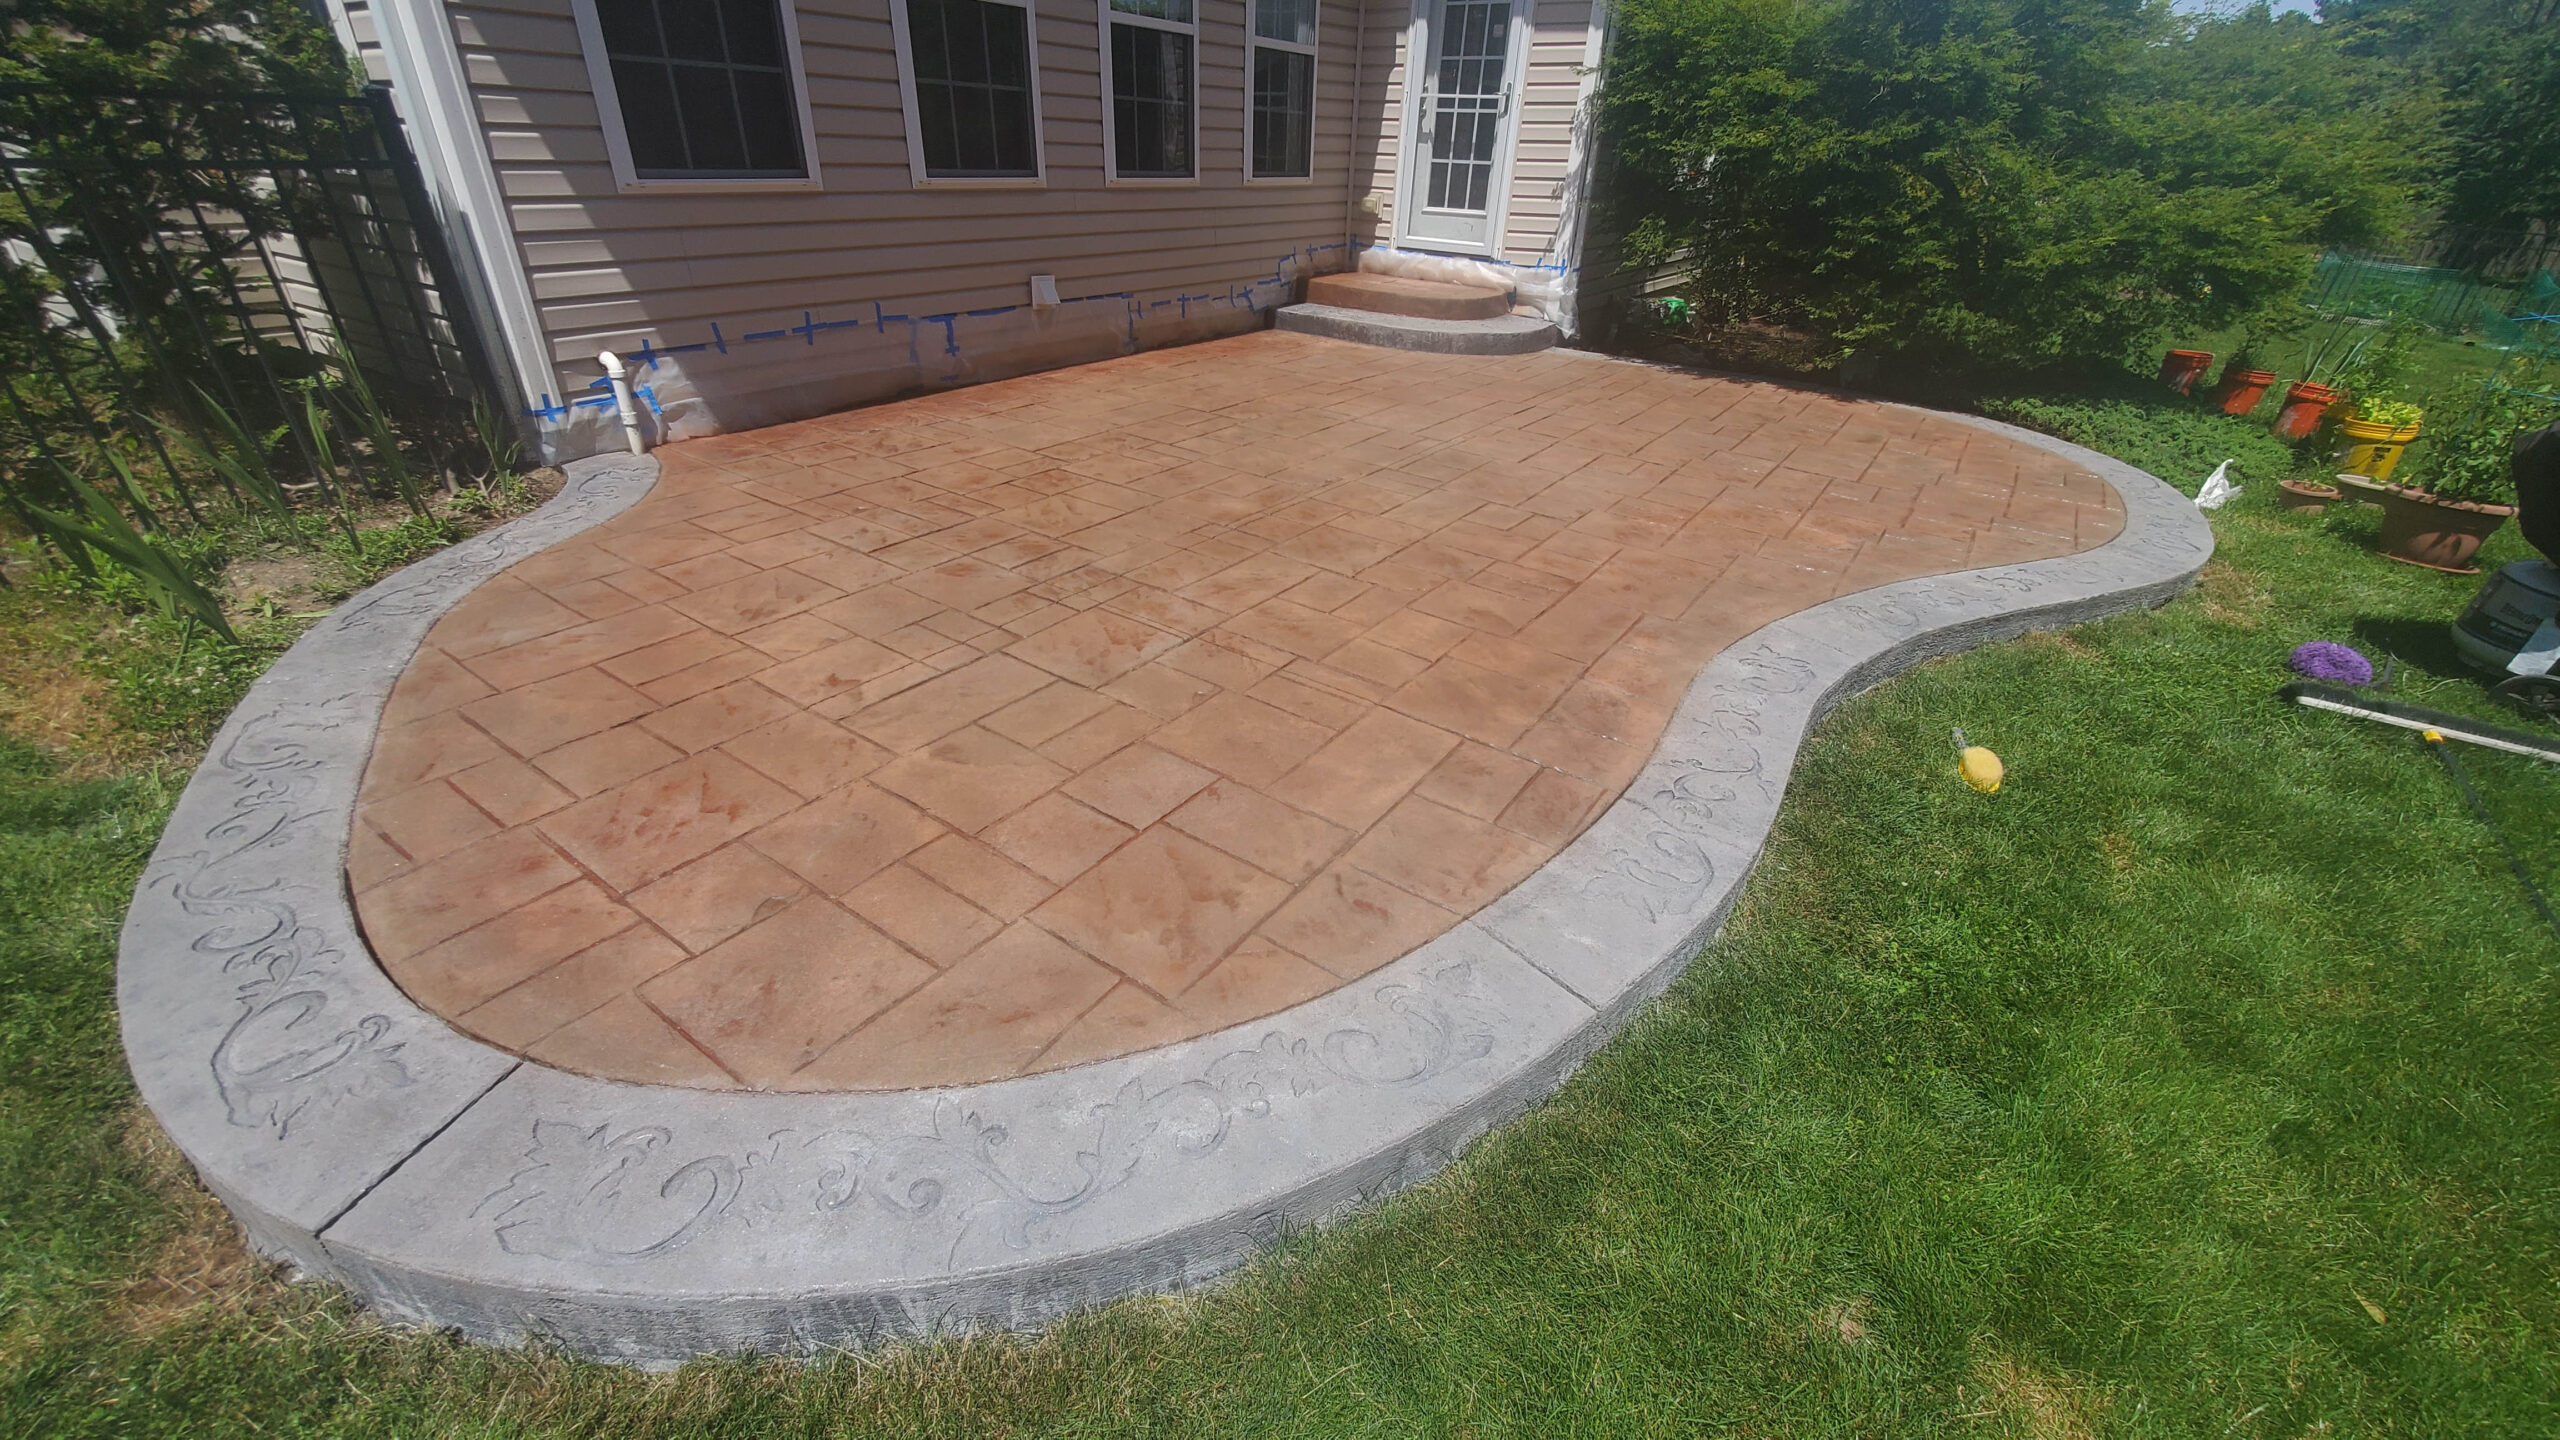 Russet & Eagle Grey Antiquing Stains on Stamped Concrete Patio